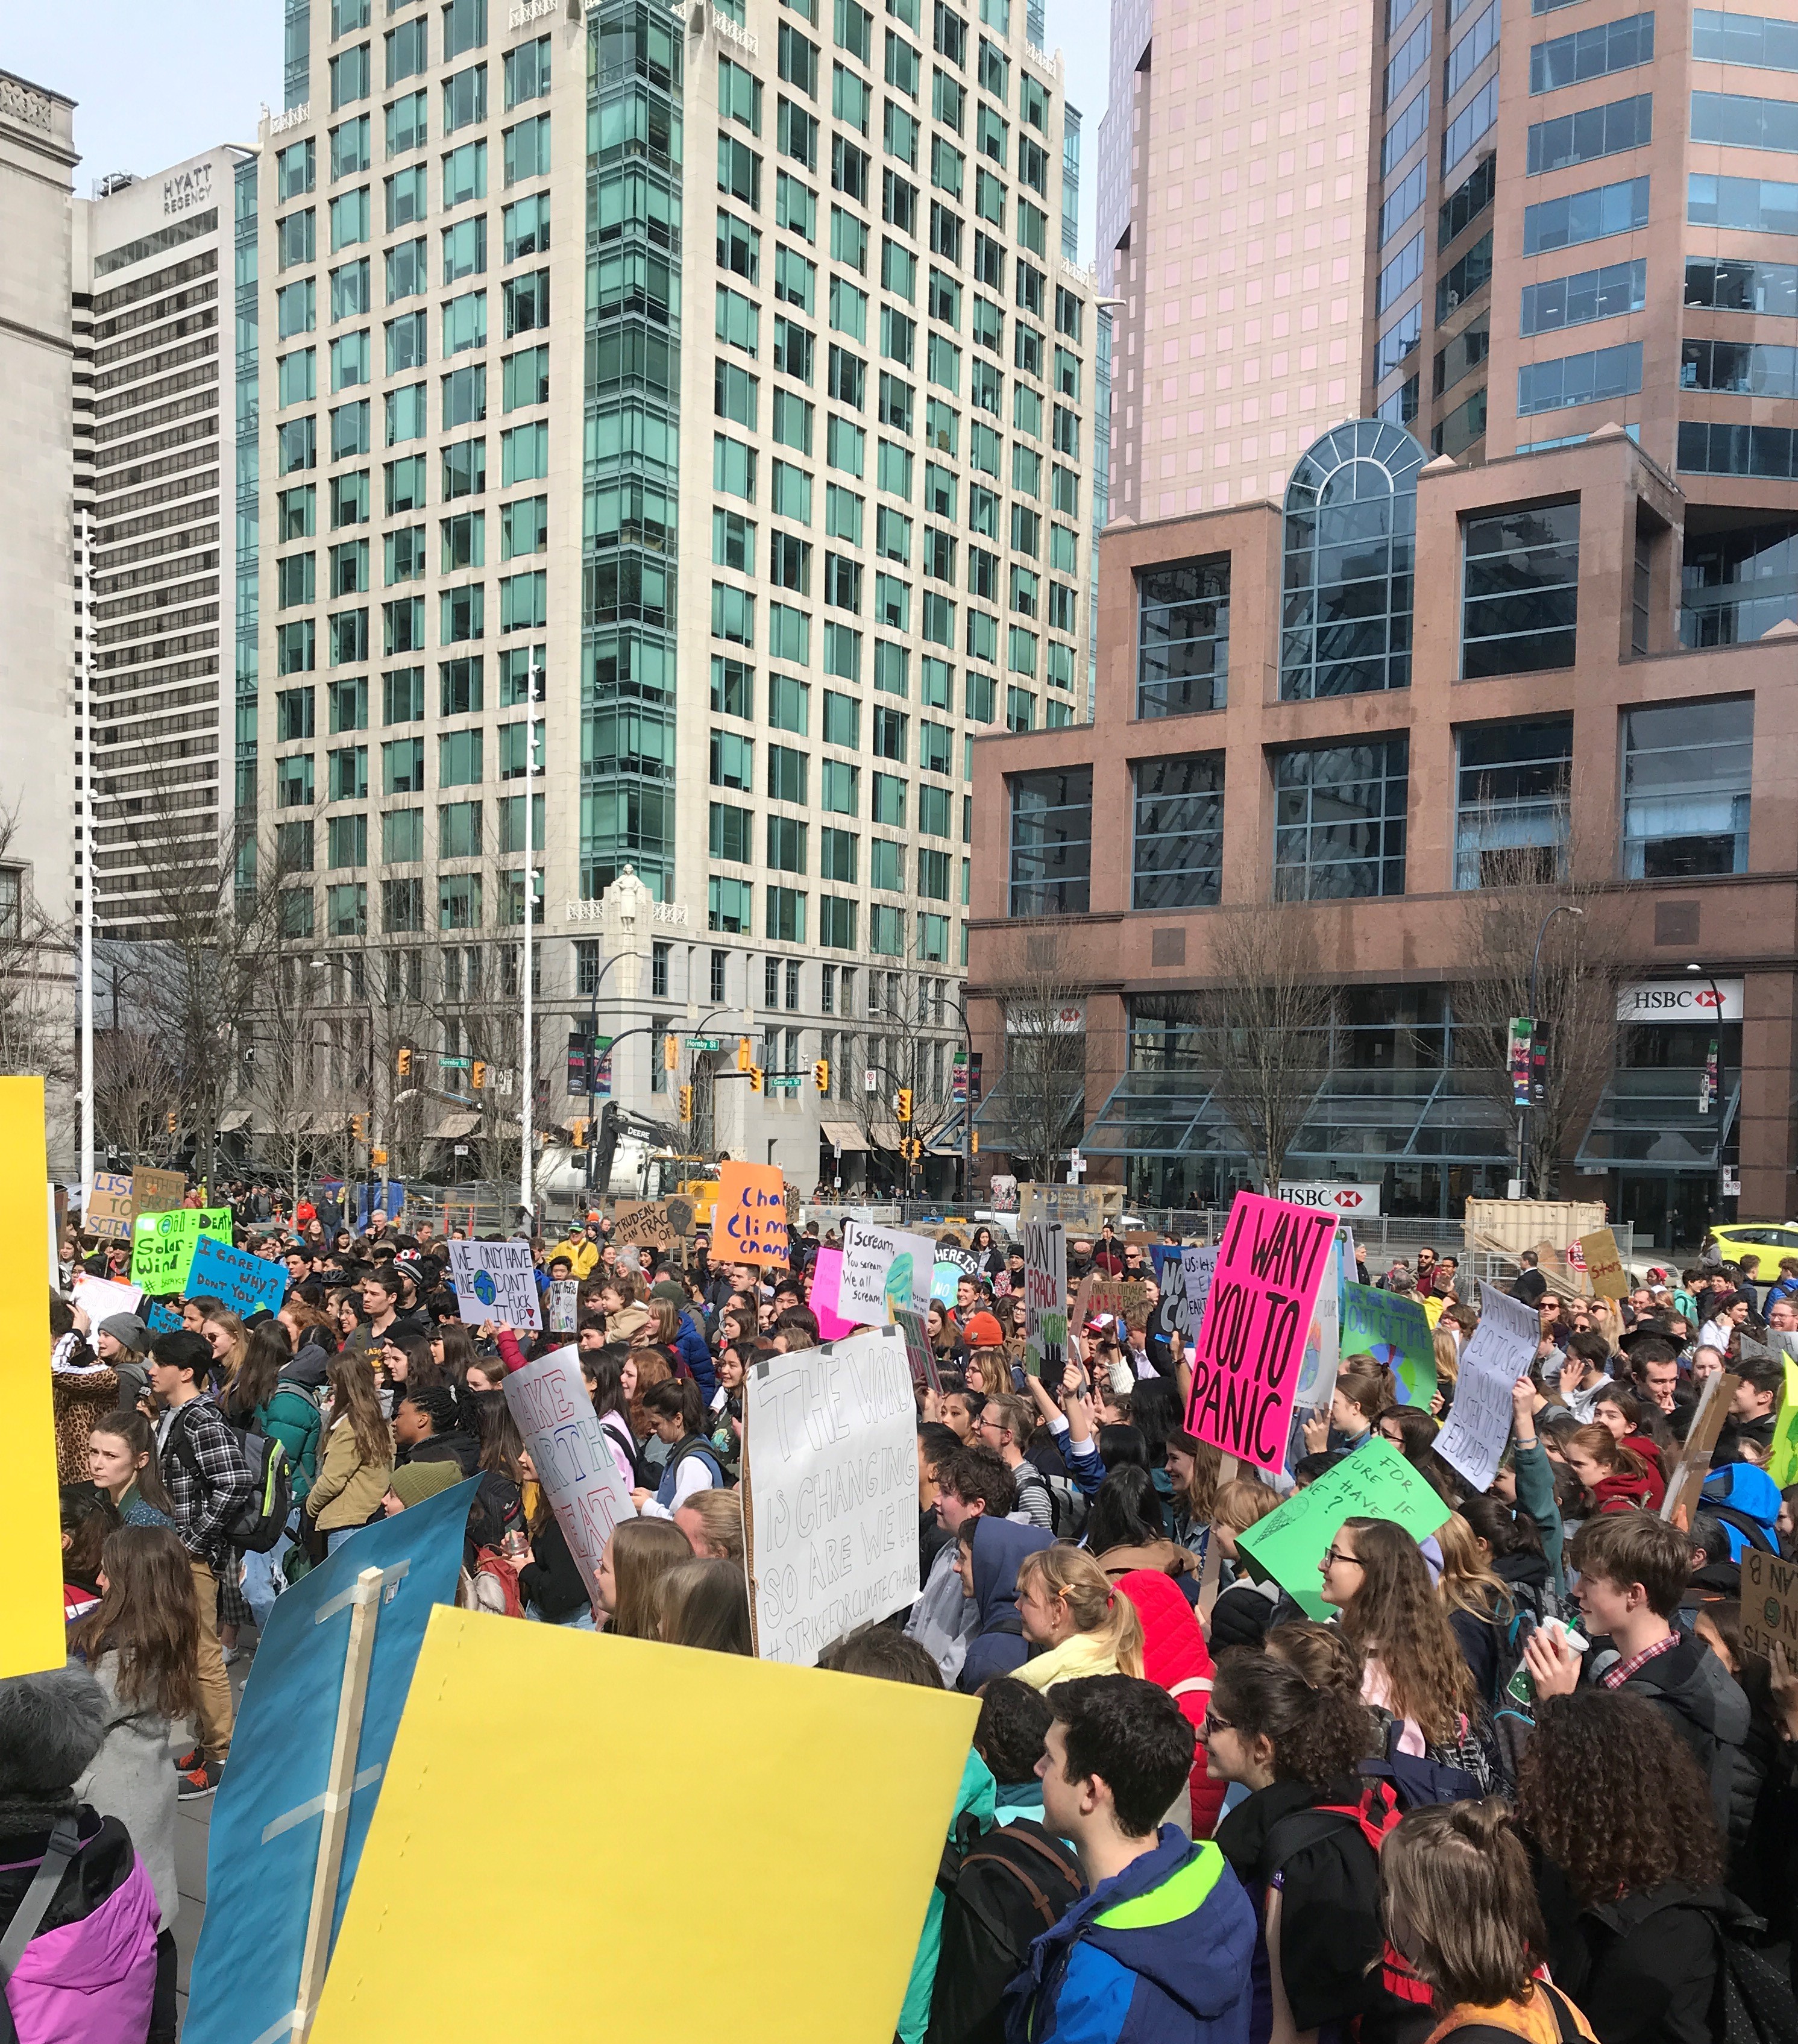 A group of thousands holding signs in downtown Vancouver to advocate for climate justice.